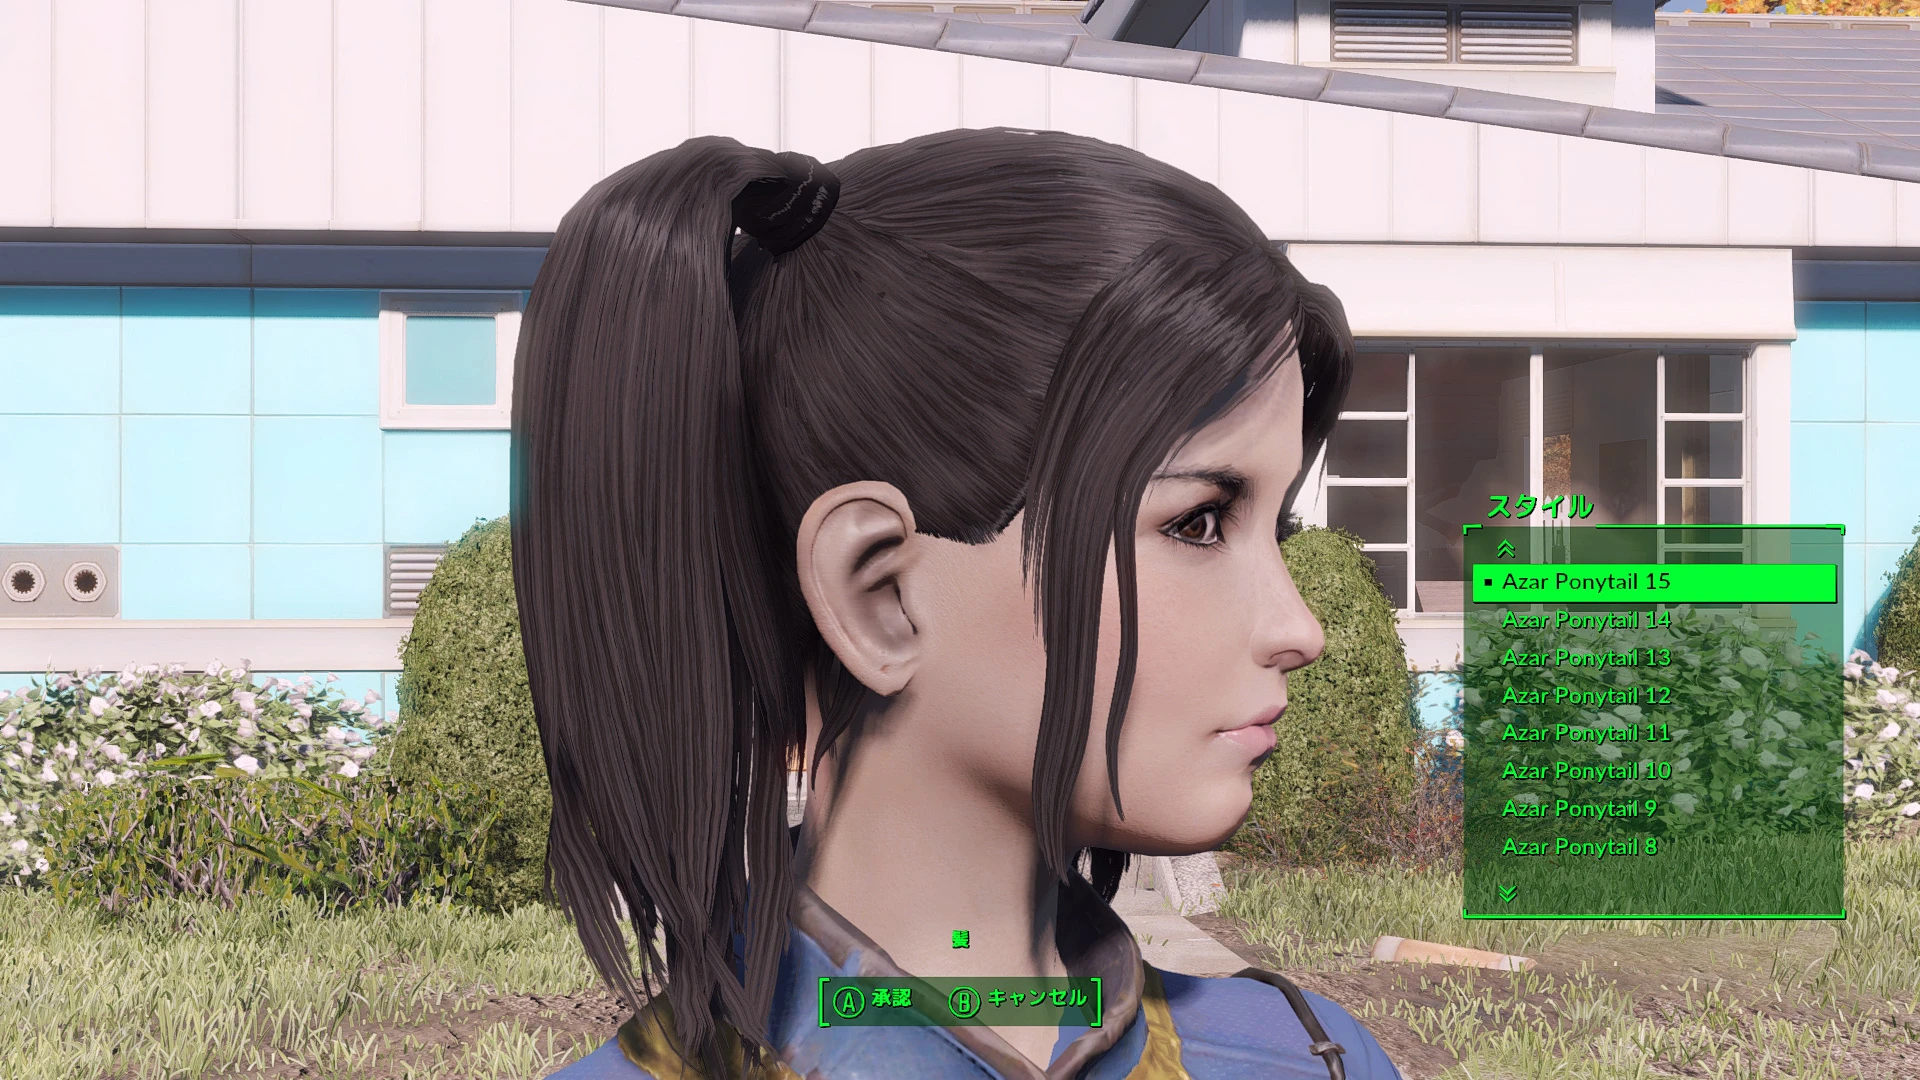 Ponytail hairstyles fallout 4 фото 18